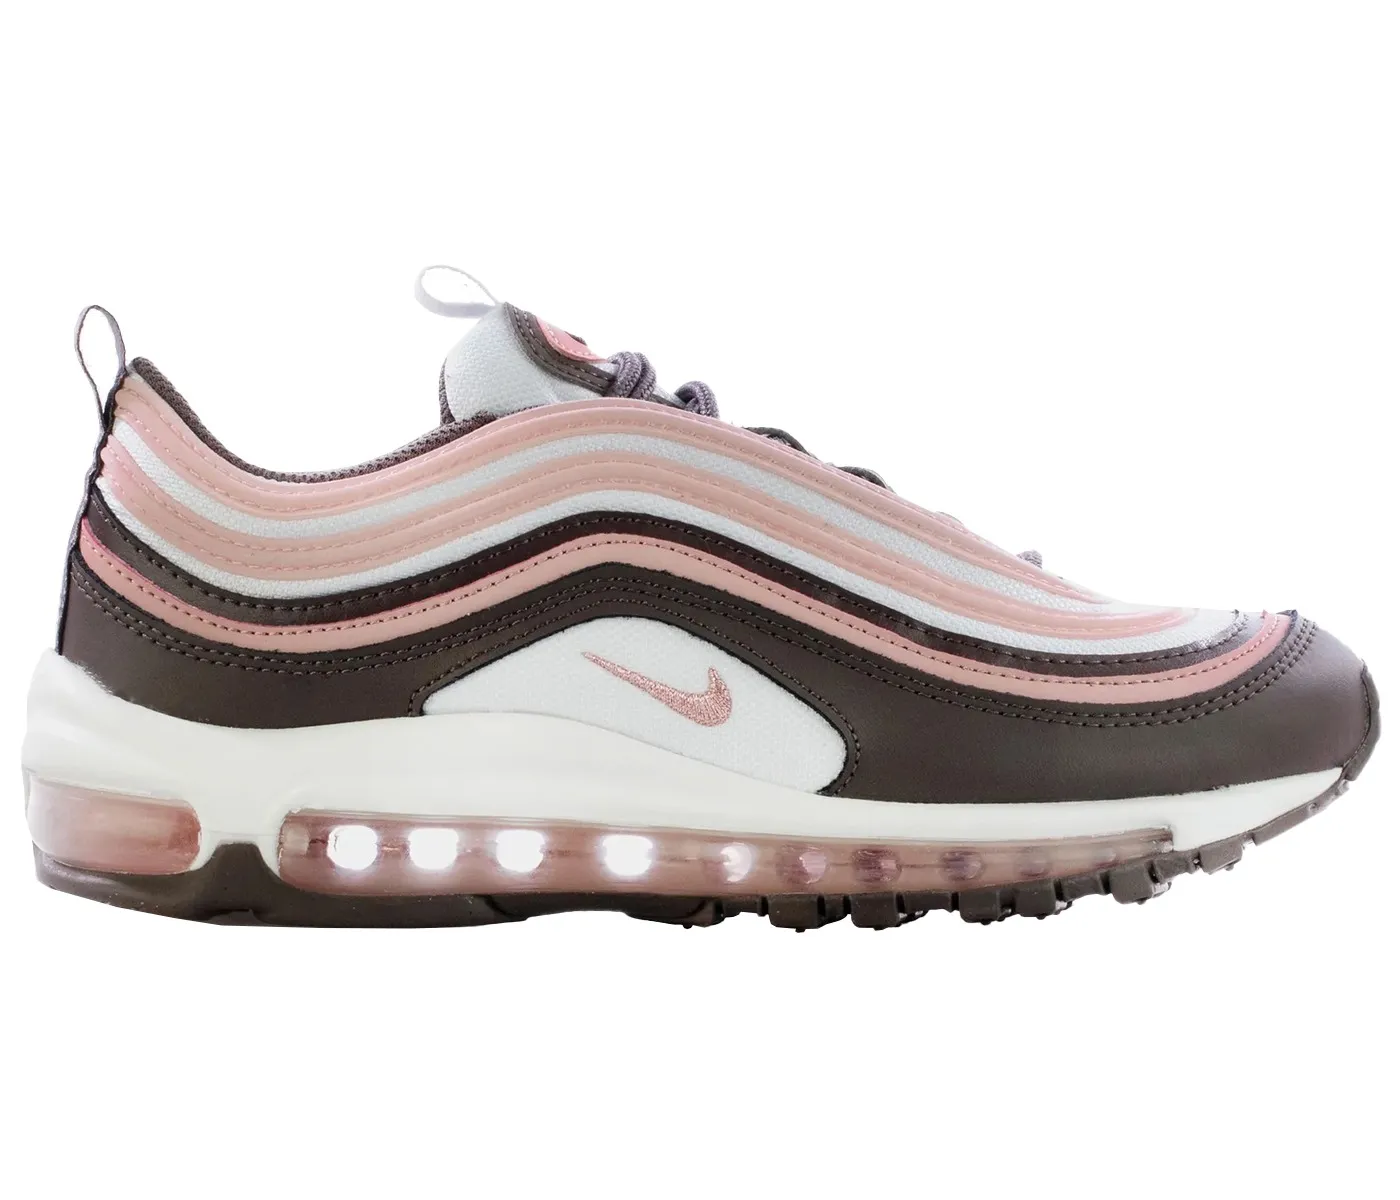 Nike Air Max 97 Violet Ore Pink Glaze 